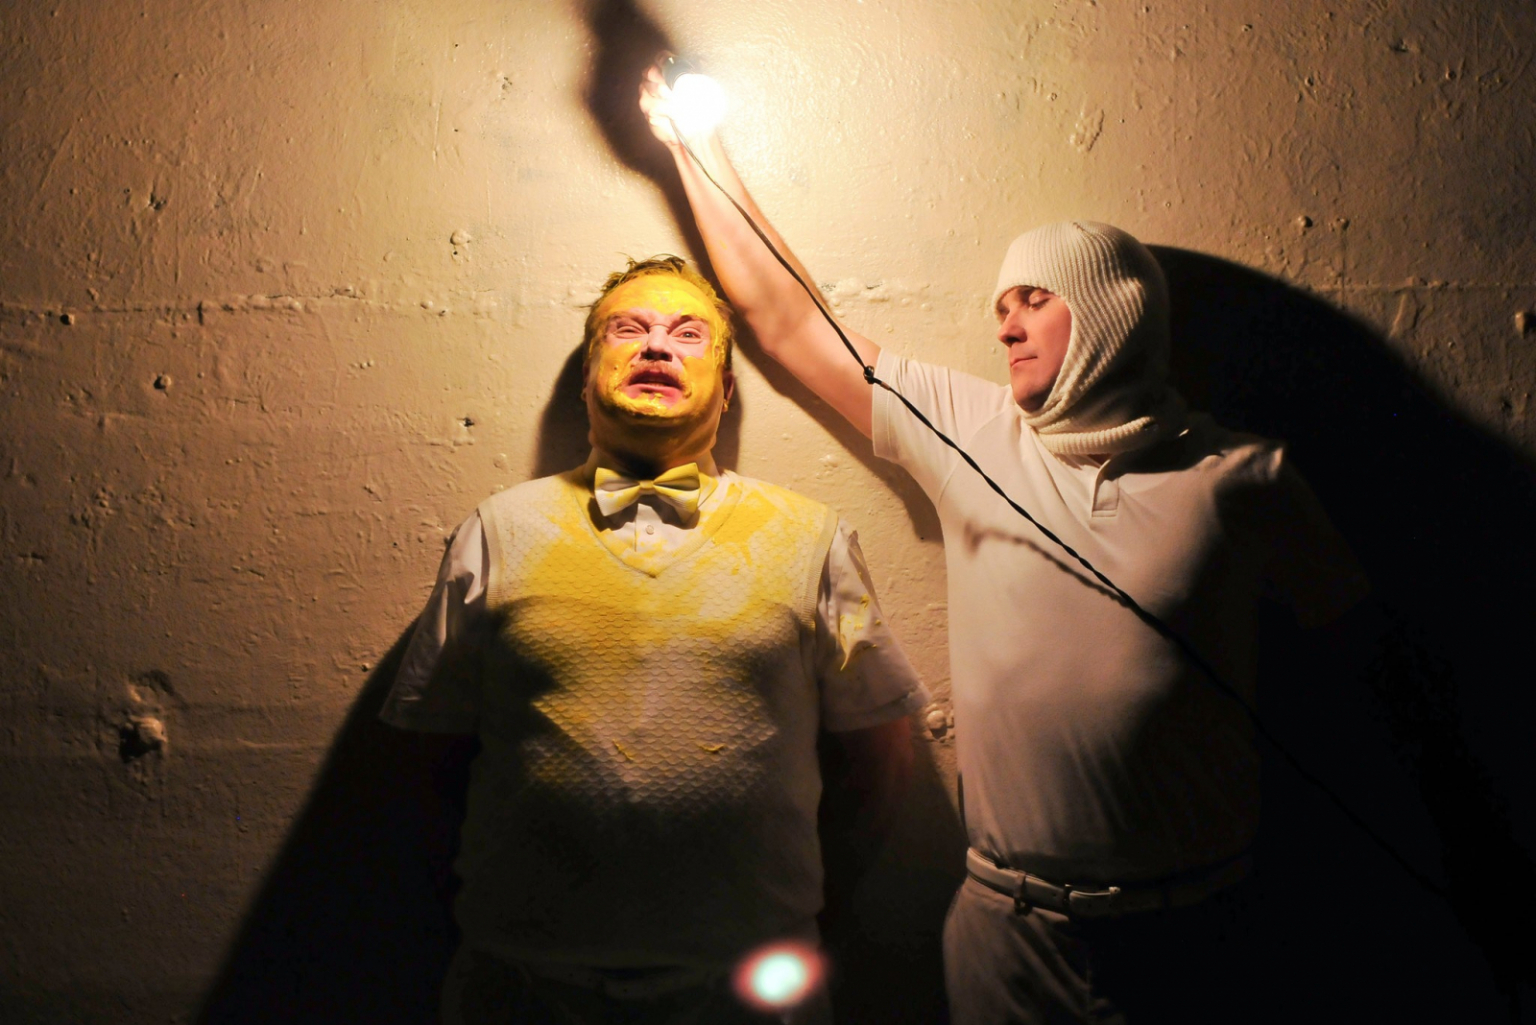 Actors, Edmund Lewis and Eric Tucker at a wall one with yellow paint on his face, the other holding a lightbulb